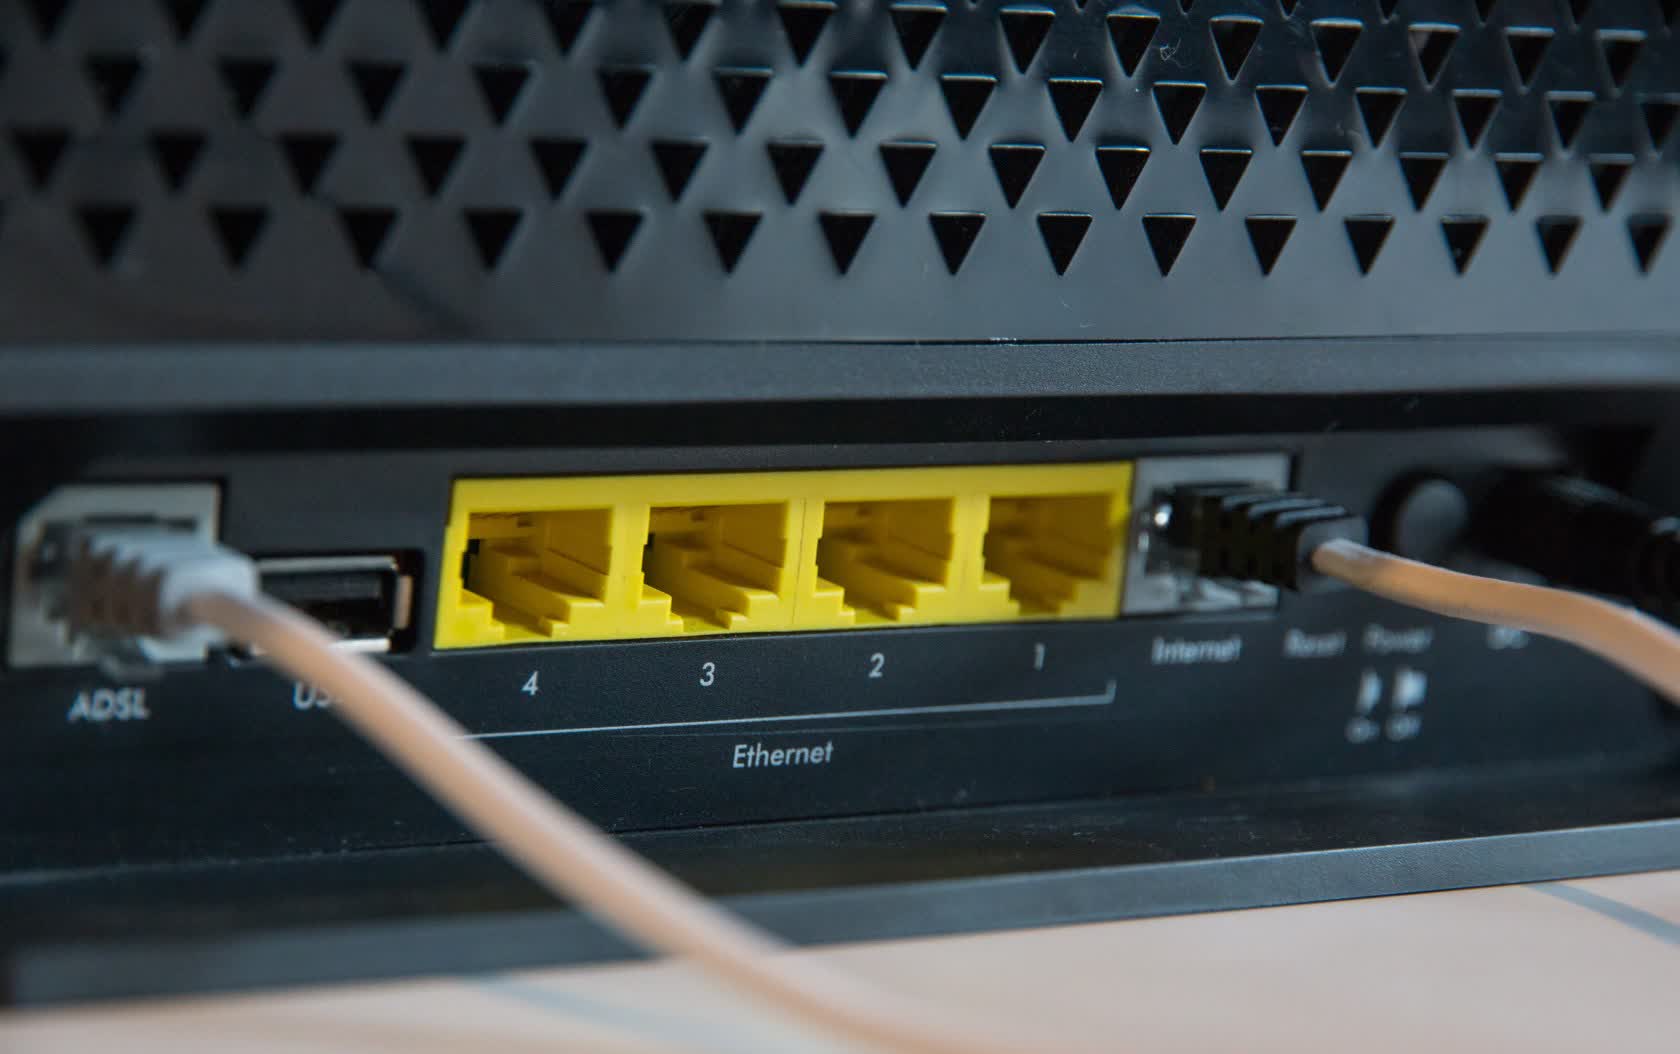 ISPs continue to charge unfair router rental fees, potentially breaking US laws